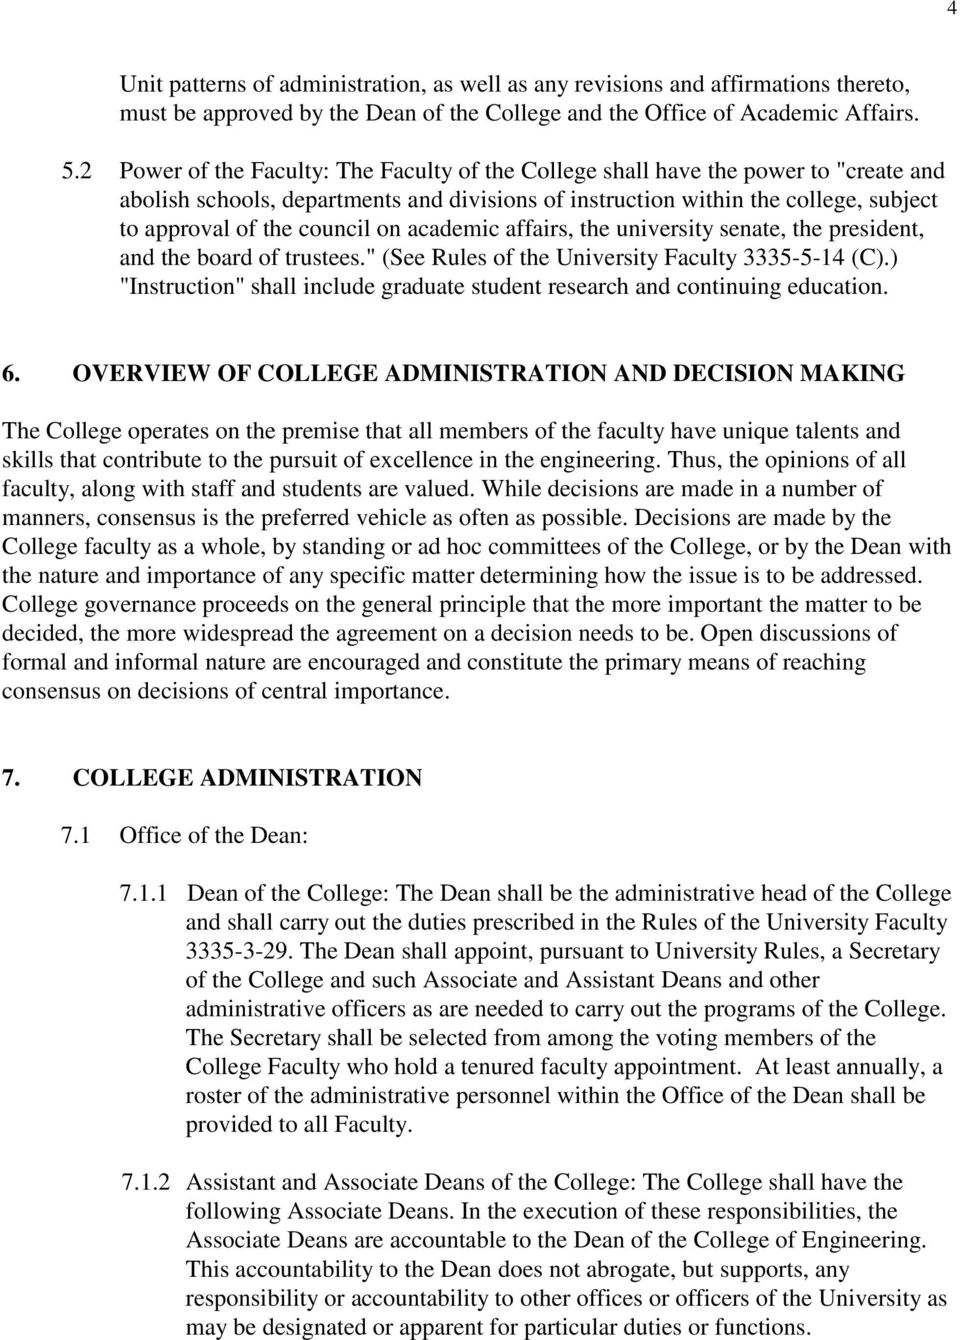 on academic affairs, the university senate, the president, and the board of trustees." (See Rules of the University Faculty 3335-5-14 (C).